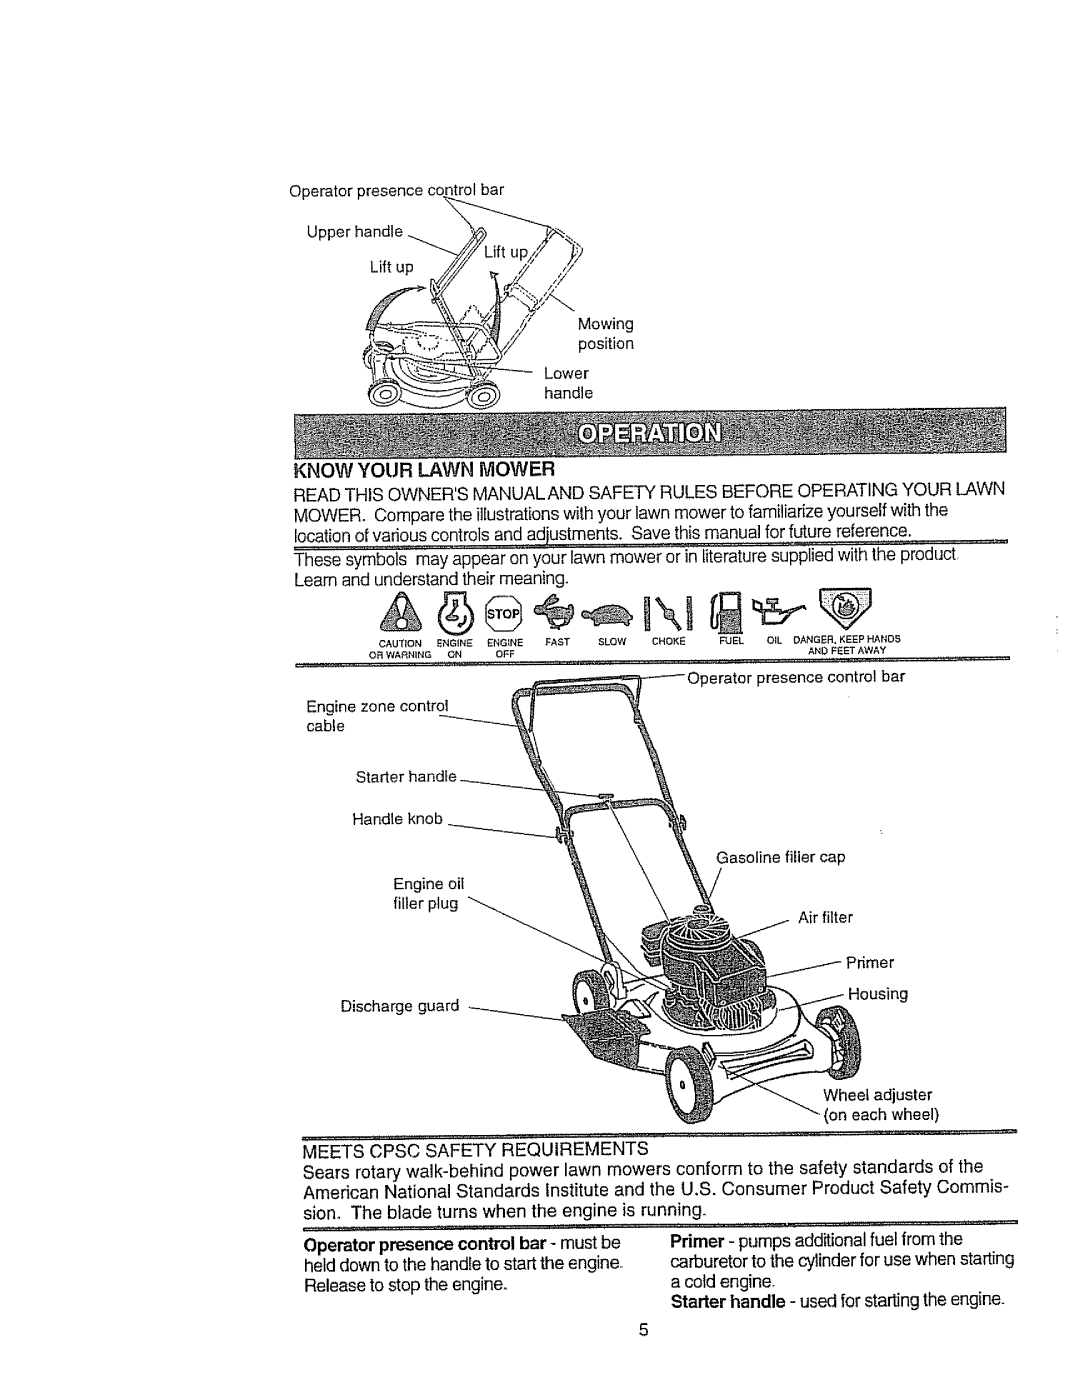 Craftsman 917.38721 owner manual Lift up Mowing position Lower handle 